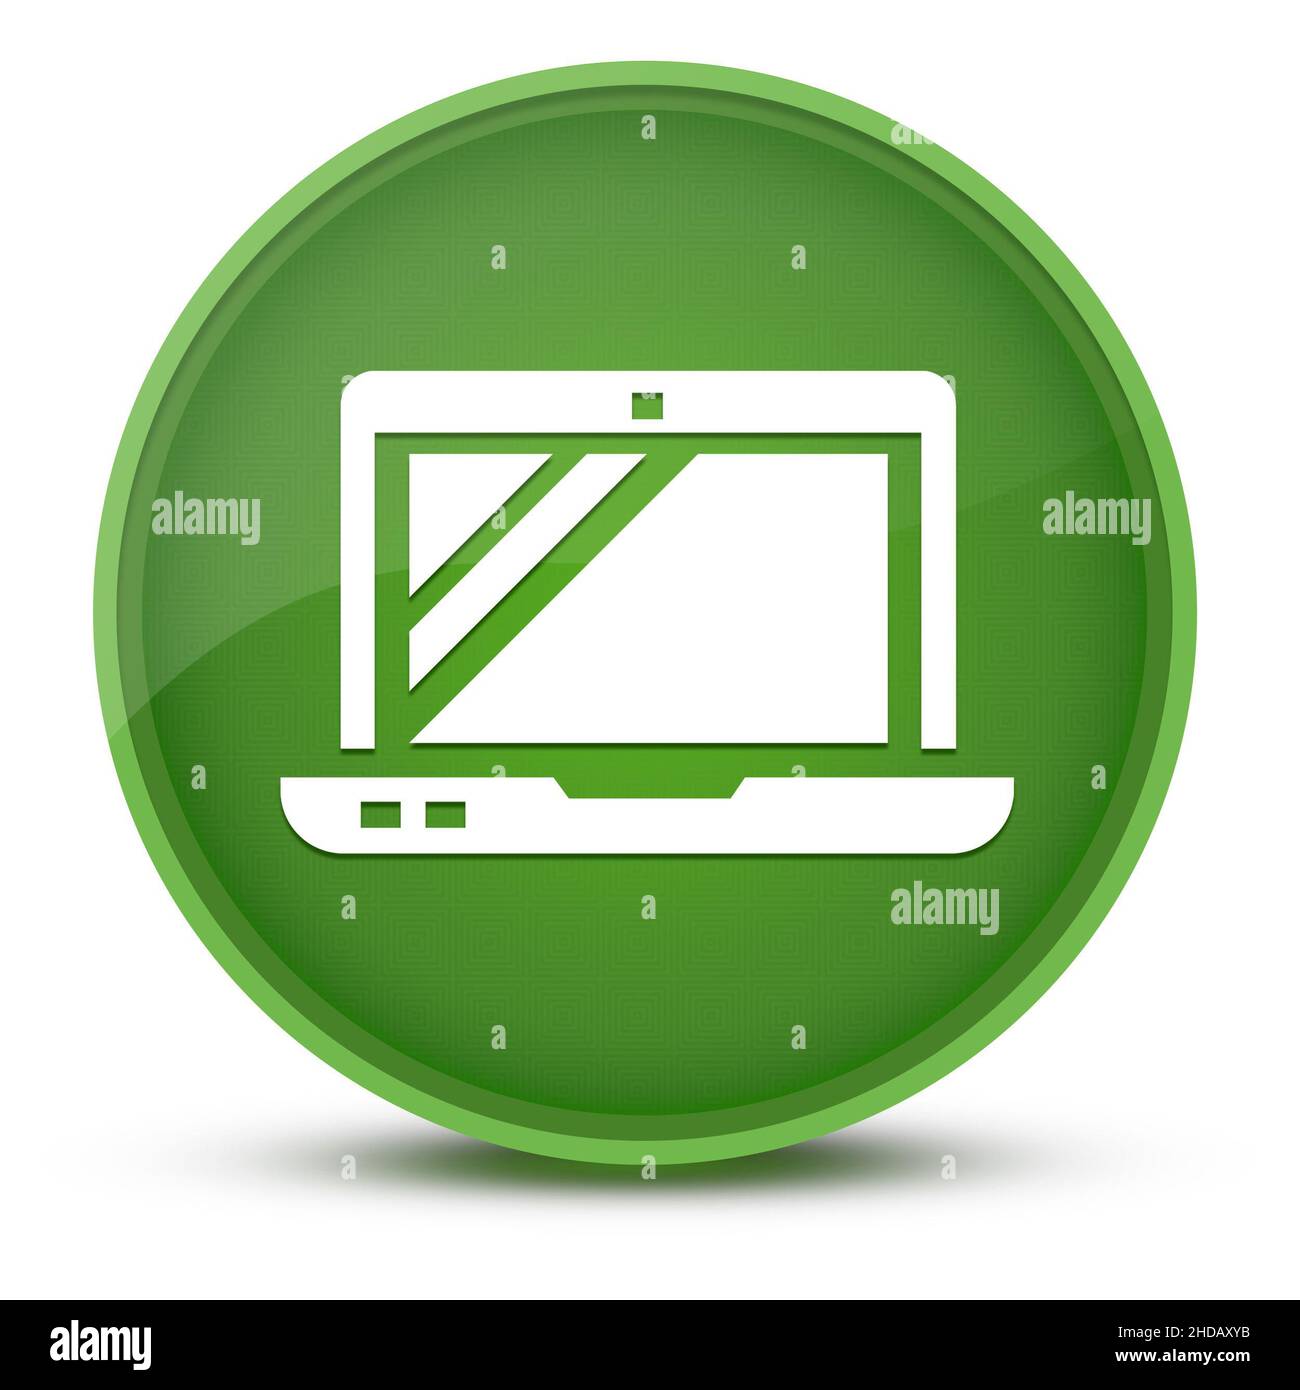 Technical skill luxurious glossy green round button abstract illustration Stock Photo